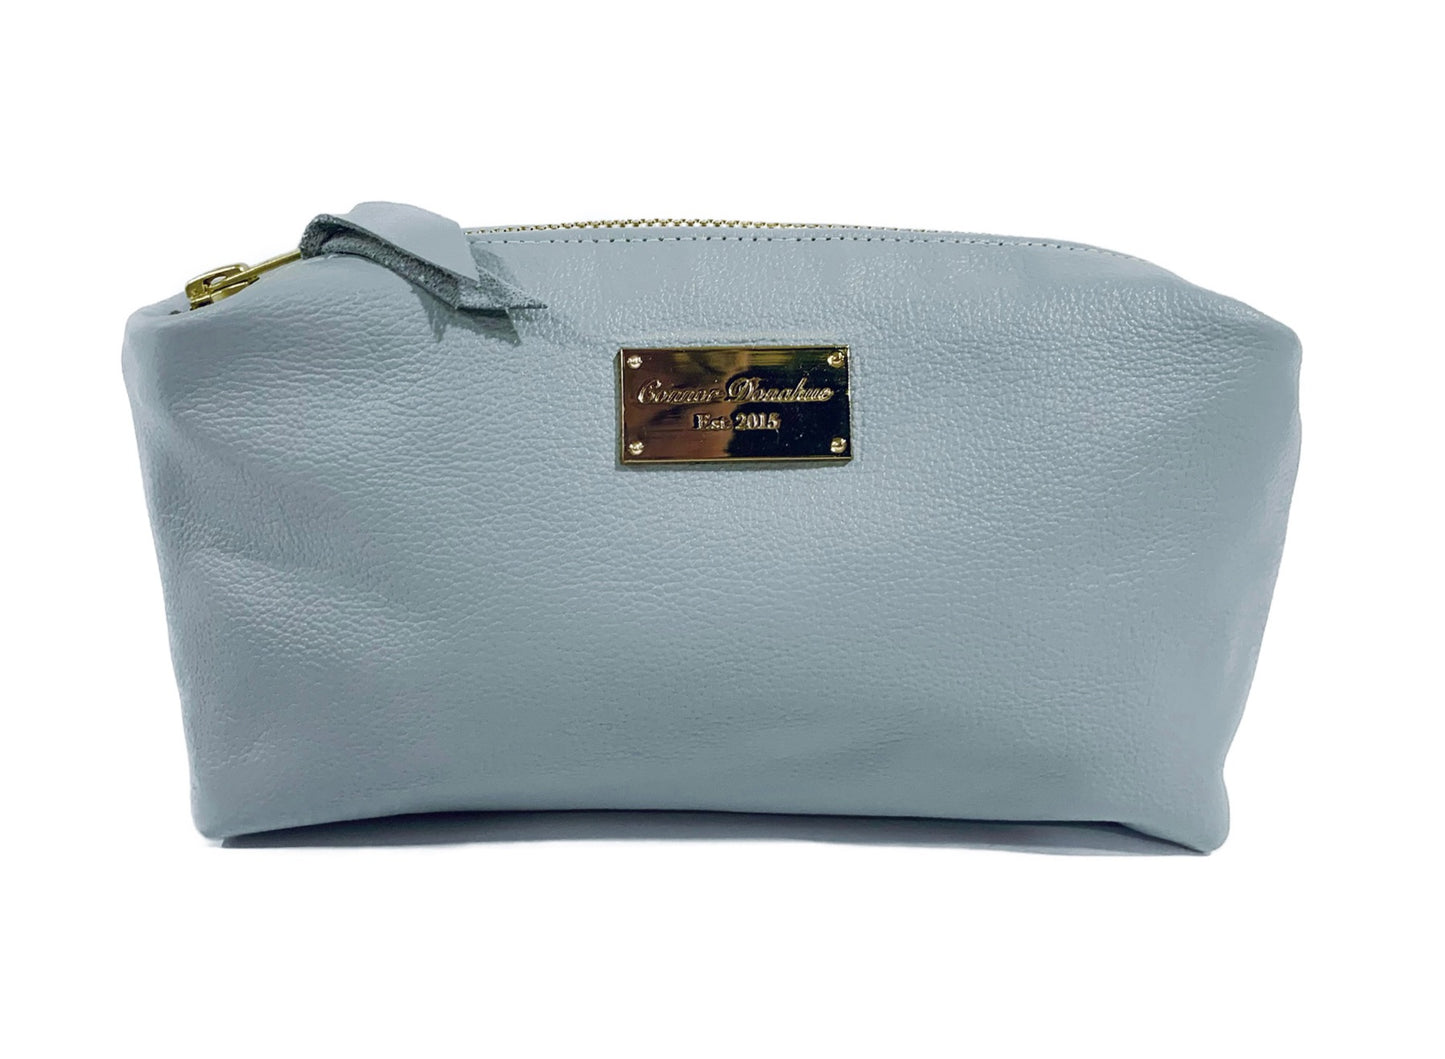 CERULEAN - LEATHER MAKEUP POUCH